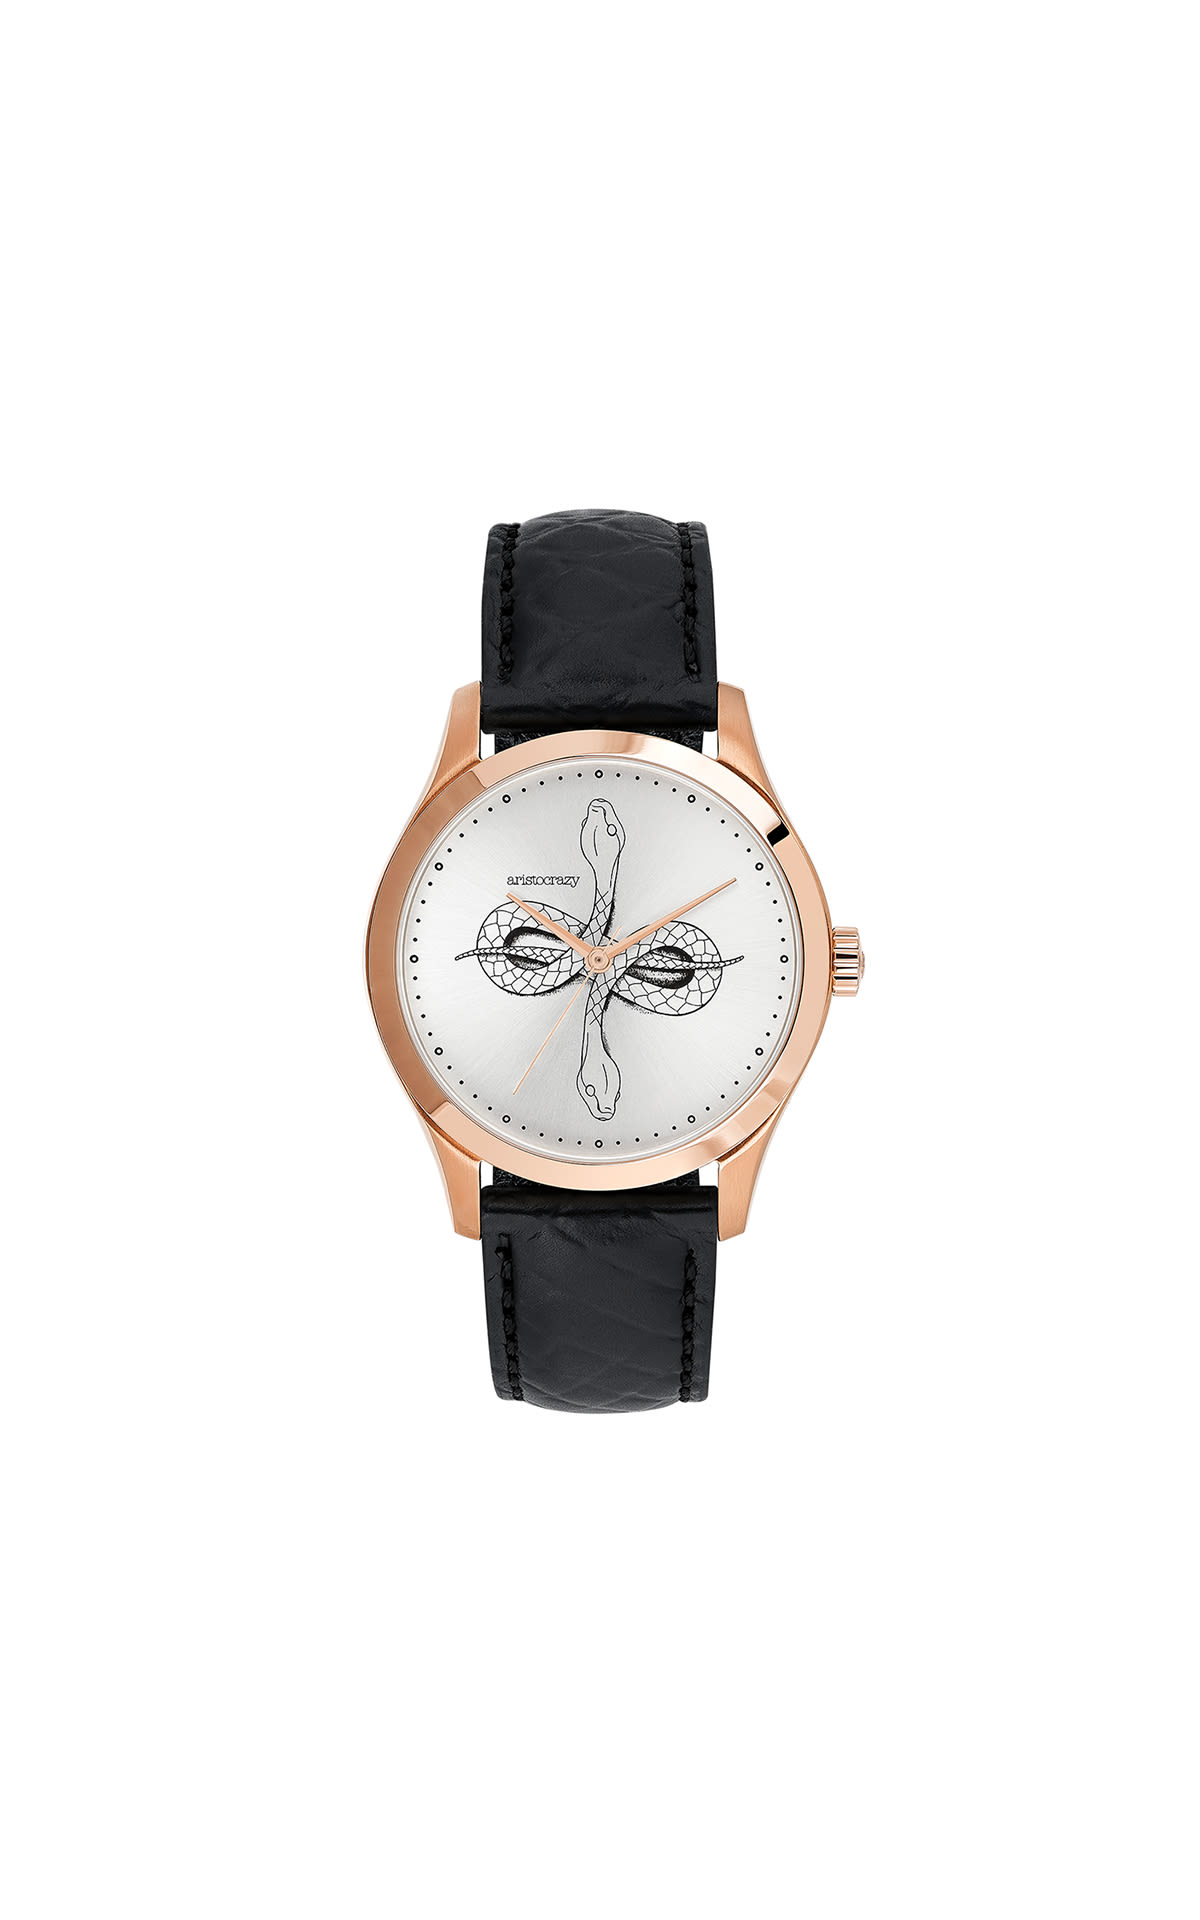 Watch with snake engraving and rose gold details